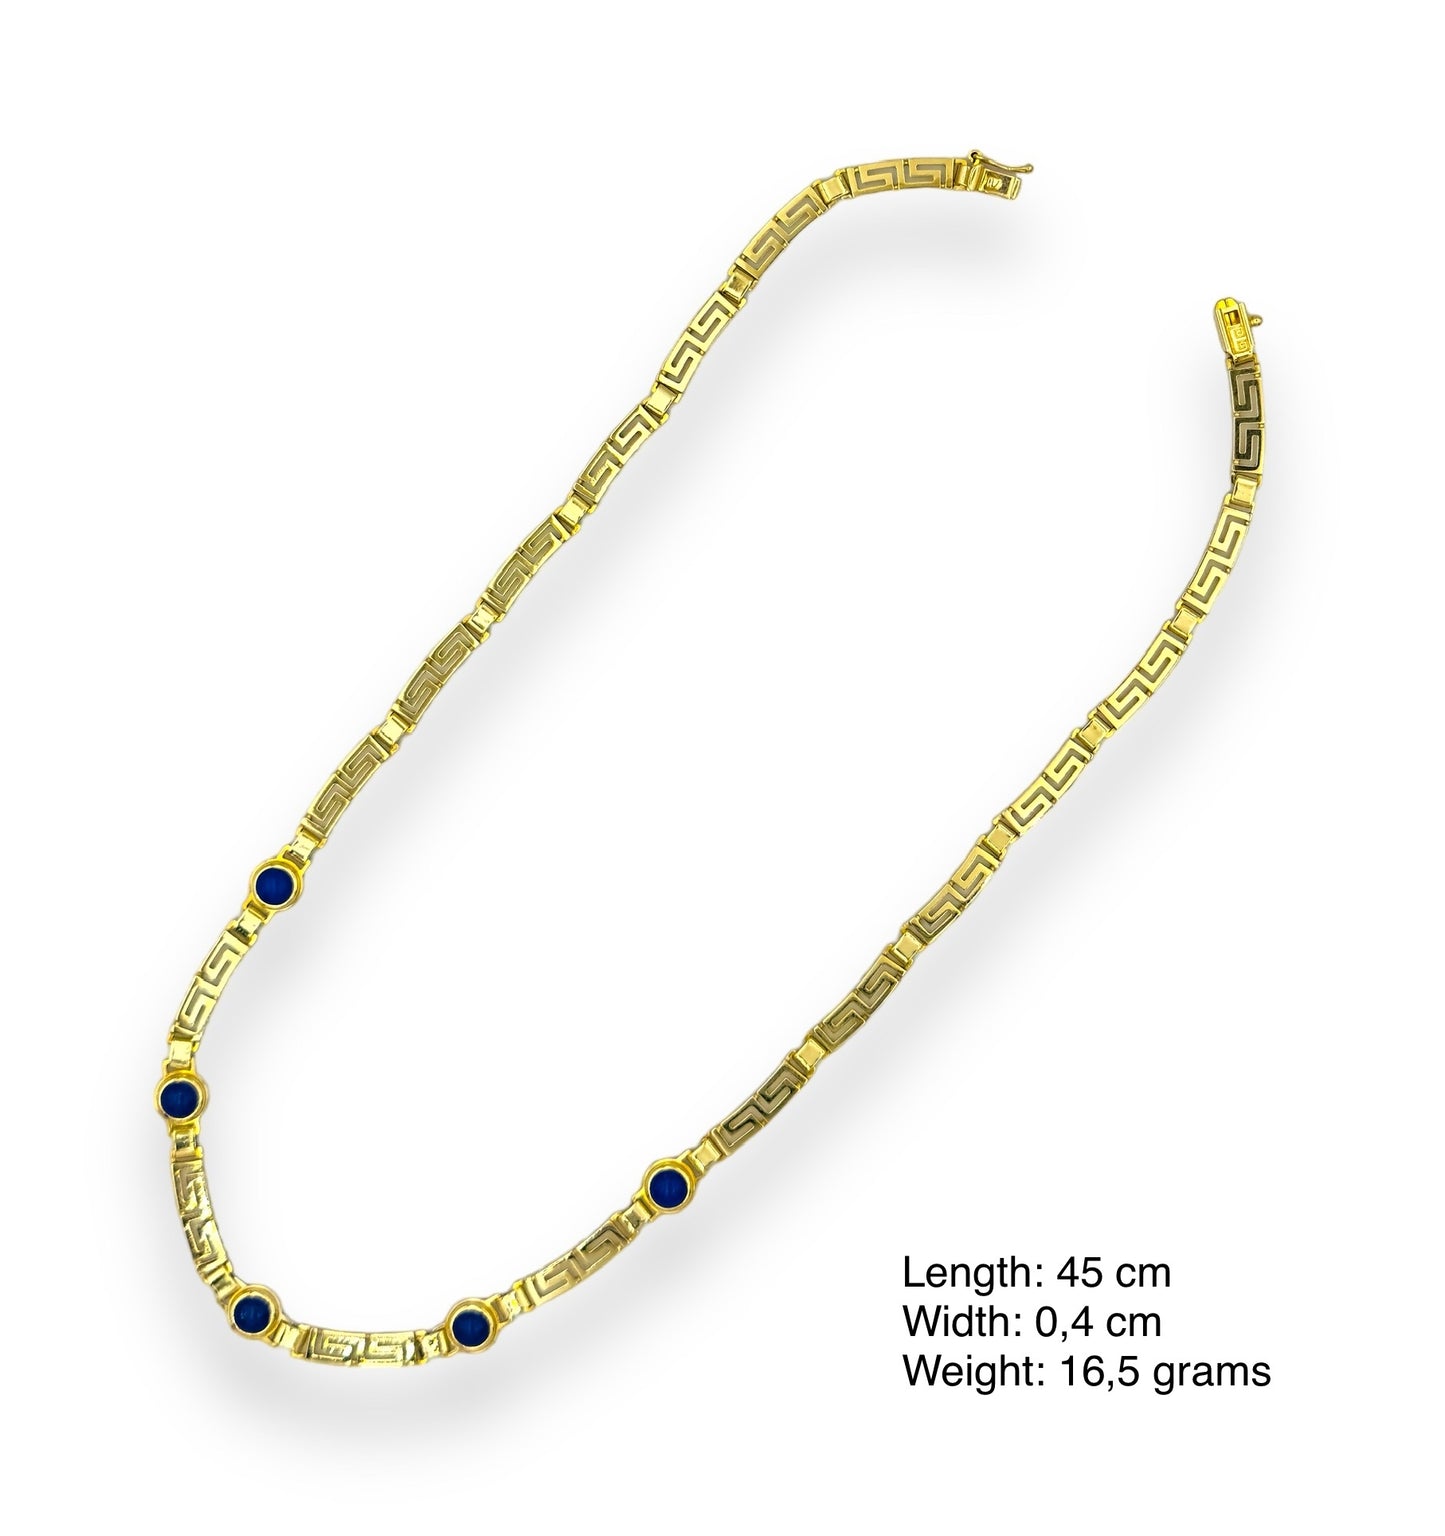 Gold Meander design necklace with Lapis Lazuli stone